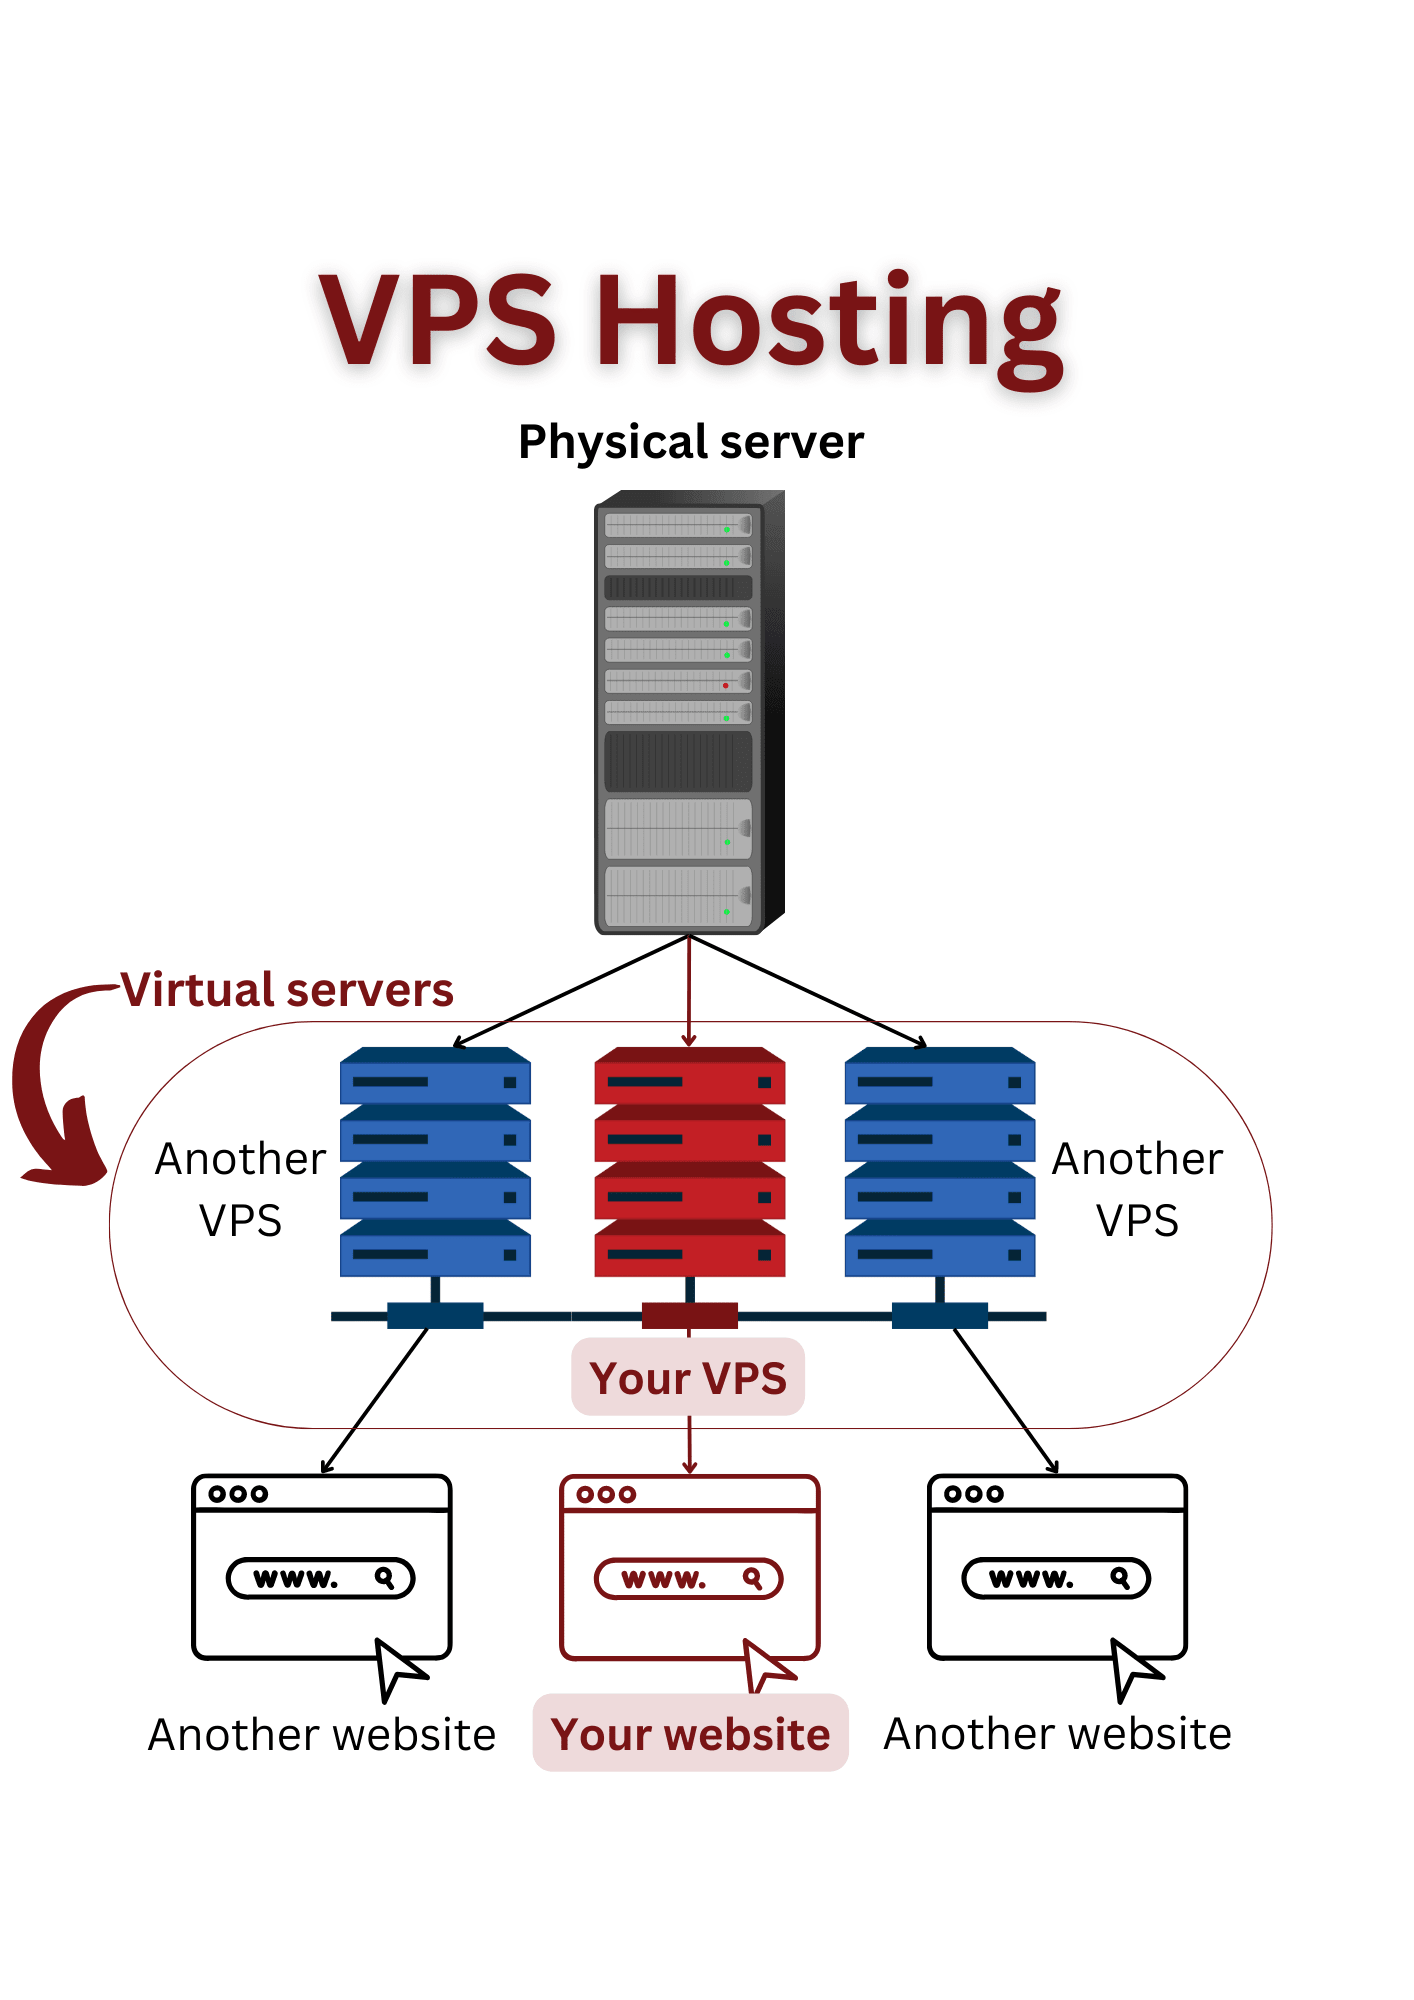 An illustration showing how a VPS hosts your website.